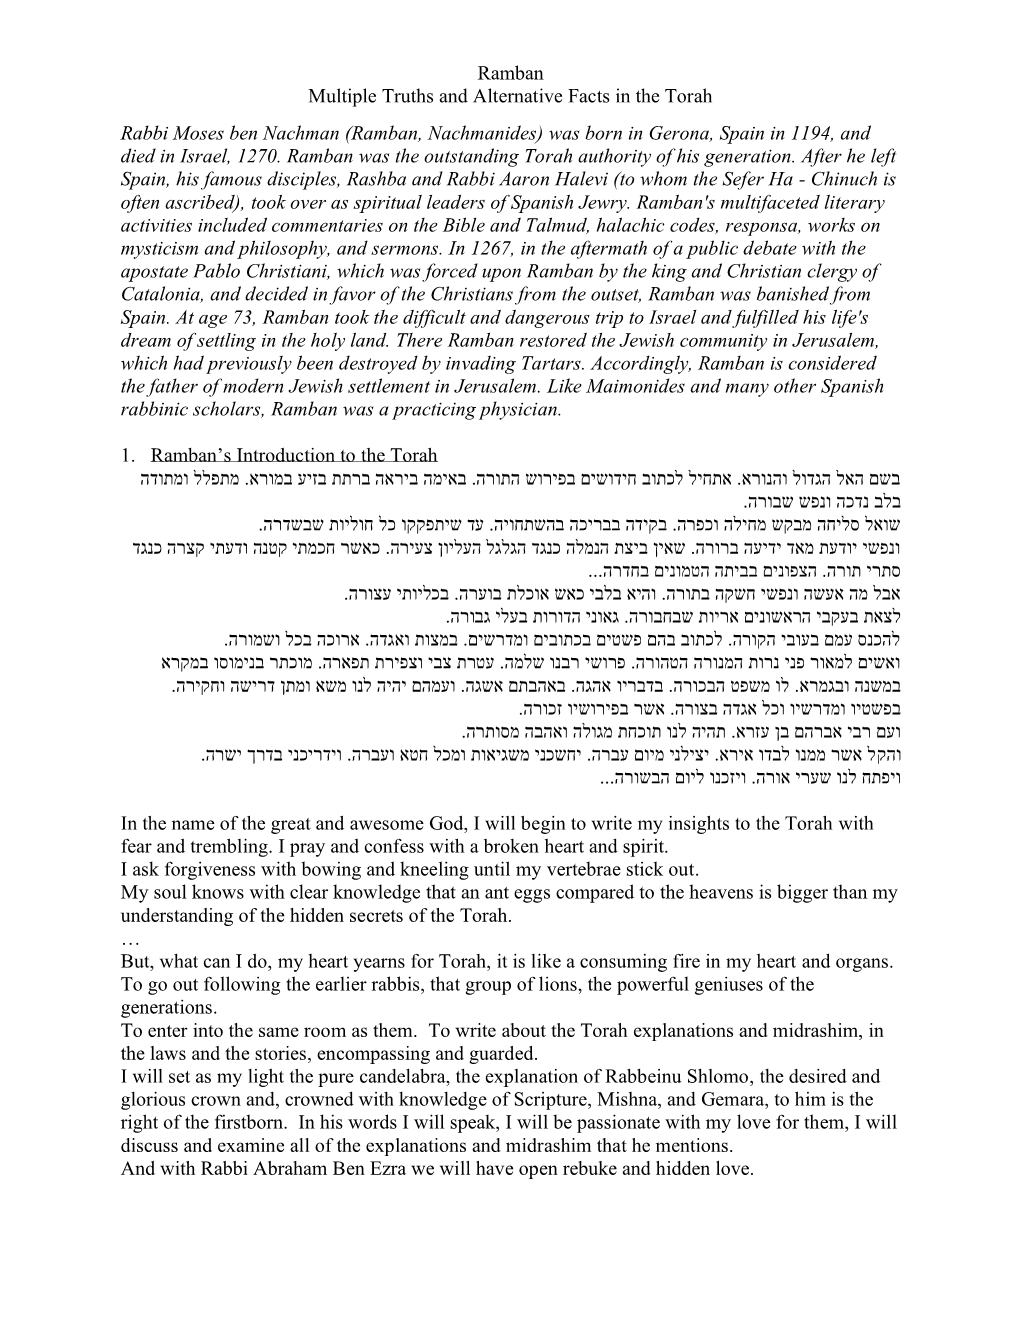 Ramban Multiple Truths and Alternative Facts in the Torah Rabbi Moses Ben Nachman (Ramban, Nachmanides) Was Born in Gerona, Spain in 1194, and Died in Israel, 1270